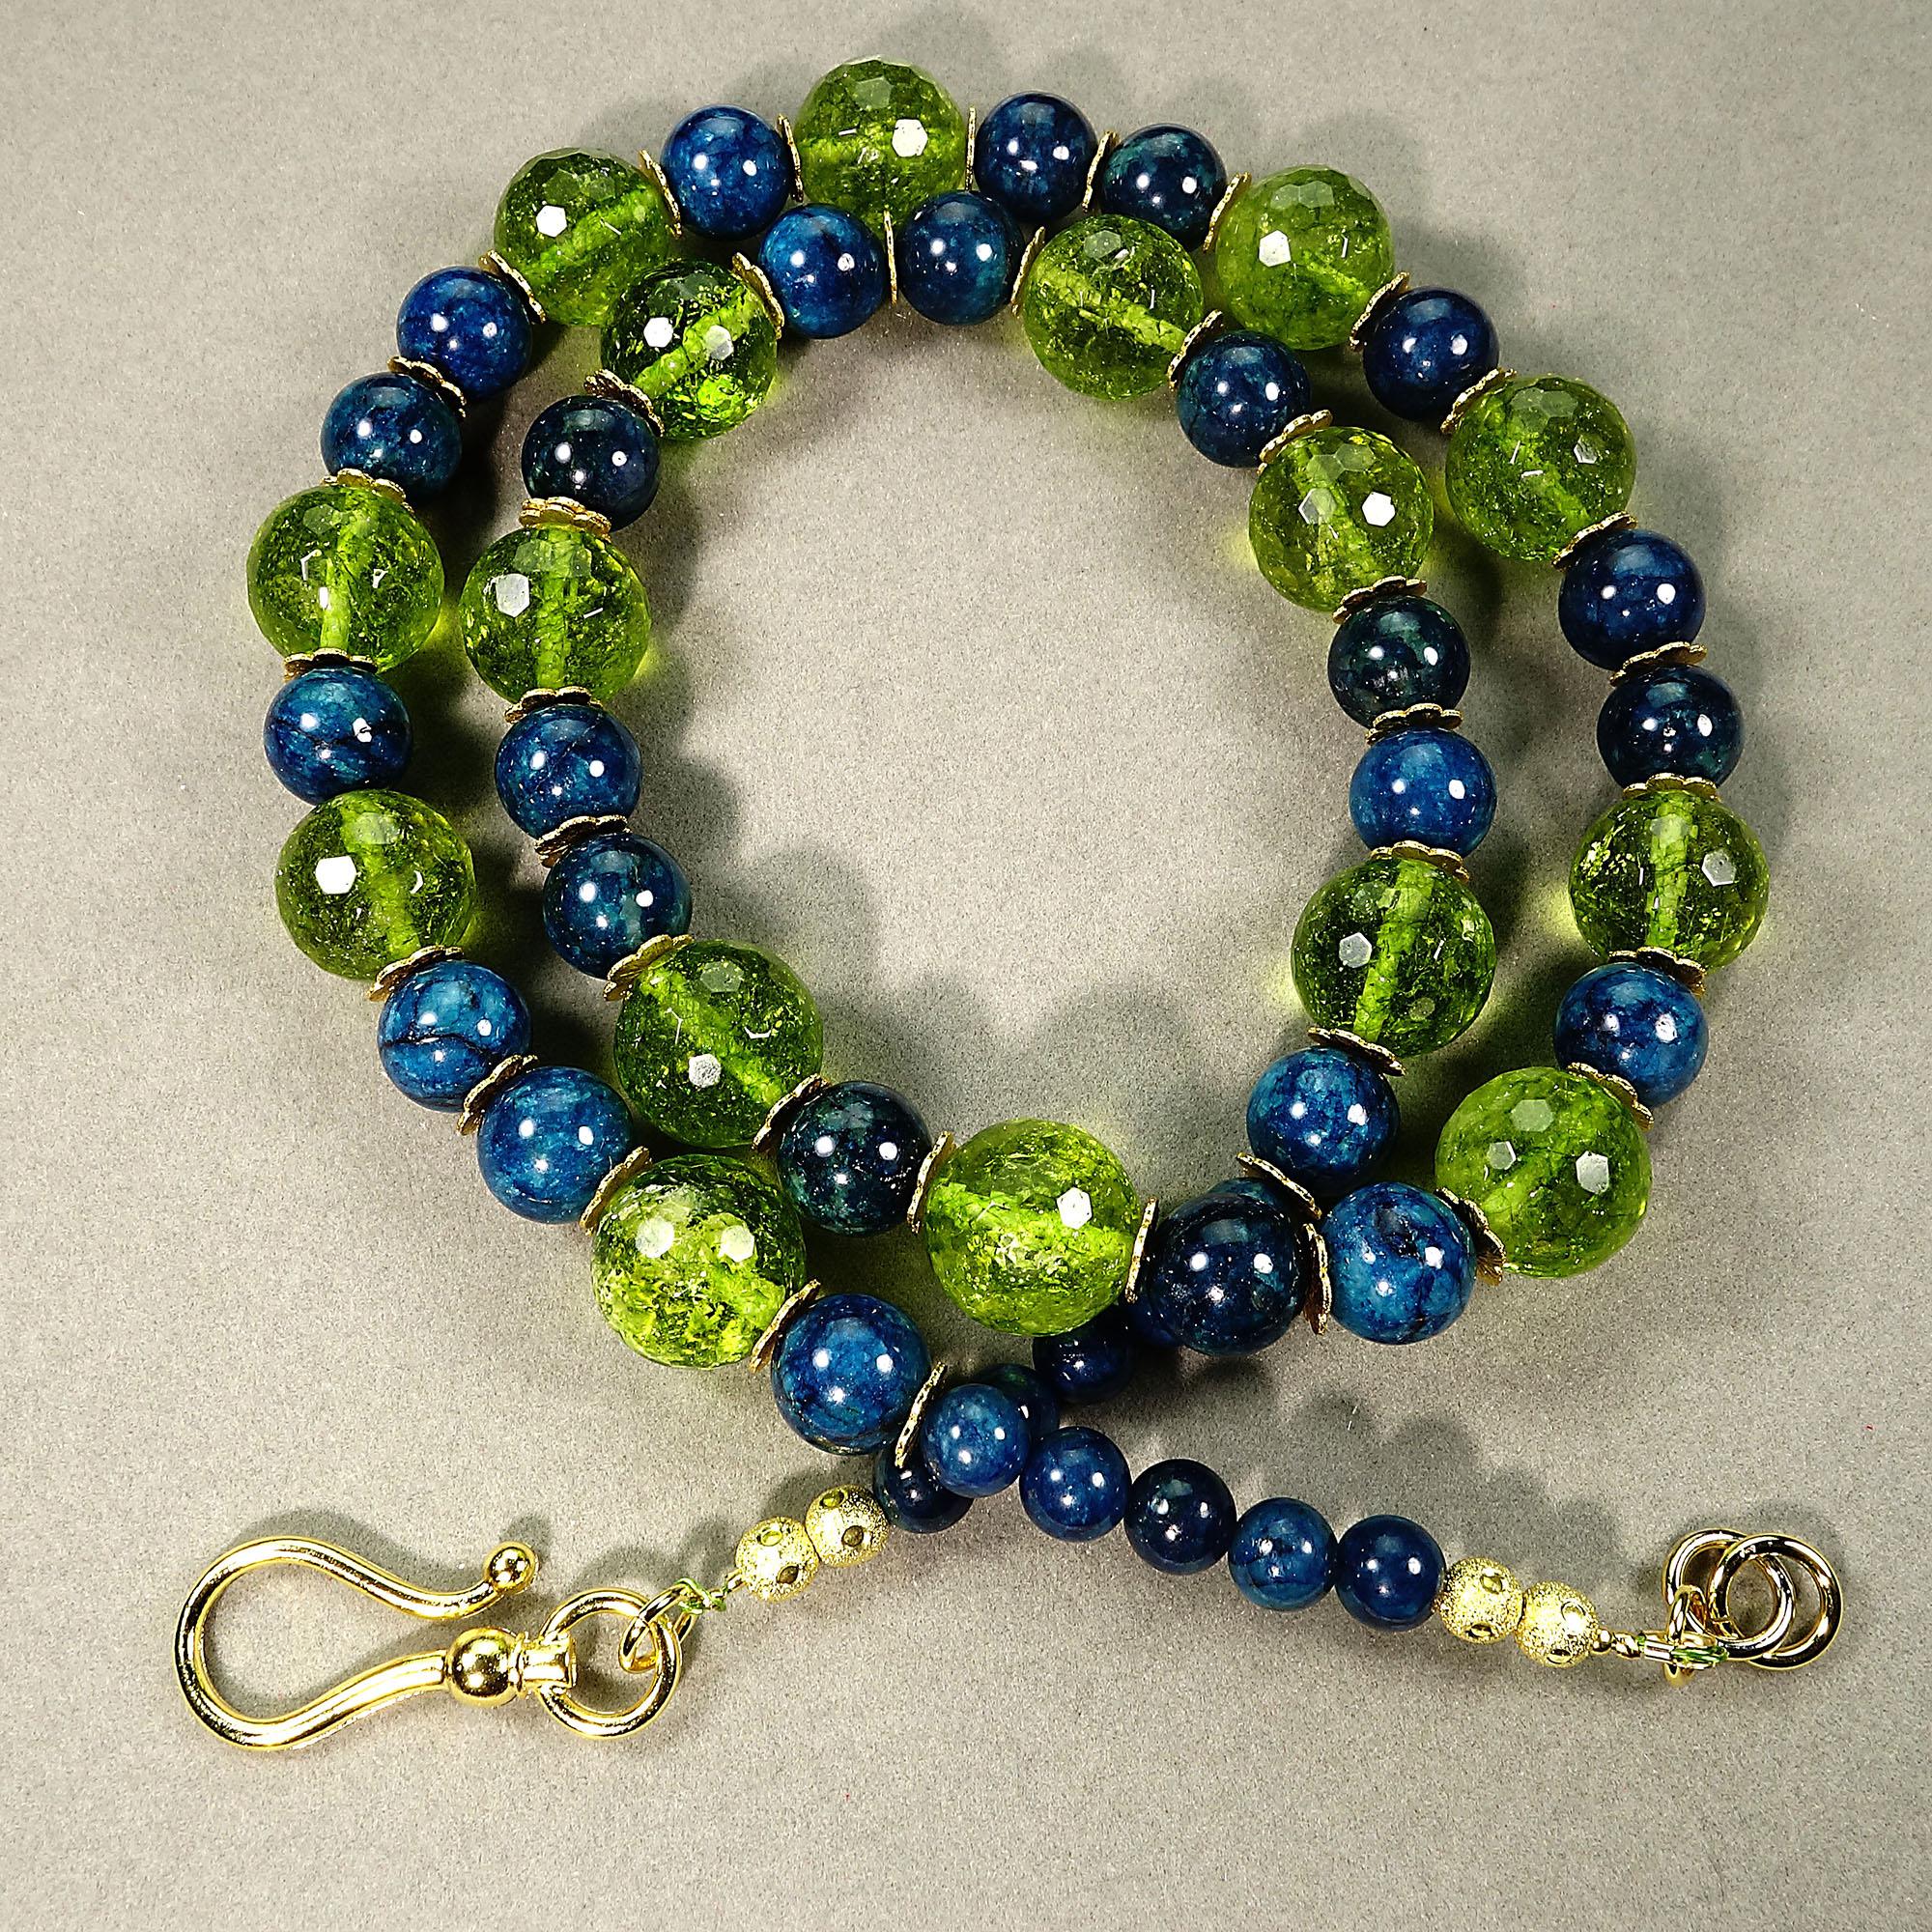 Bead AJD Peridot and Apatite Statement Necklace